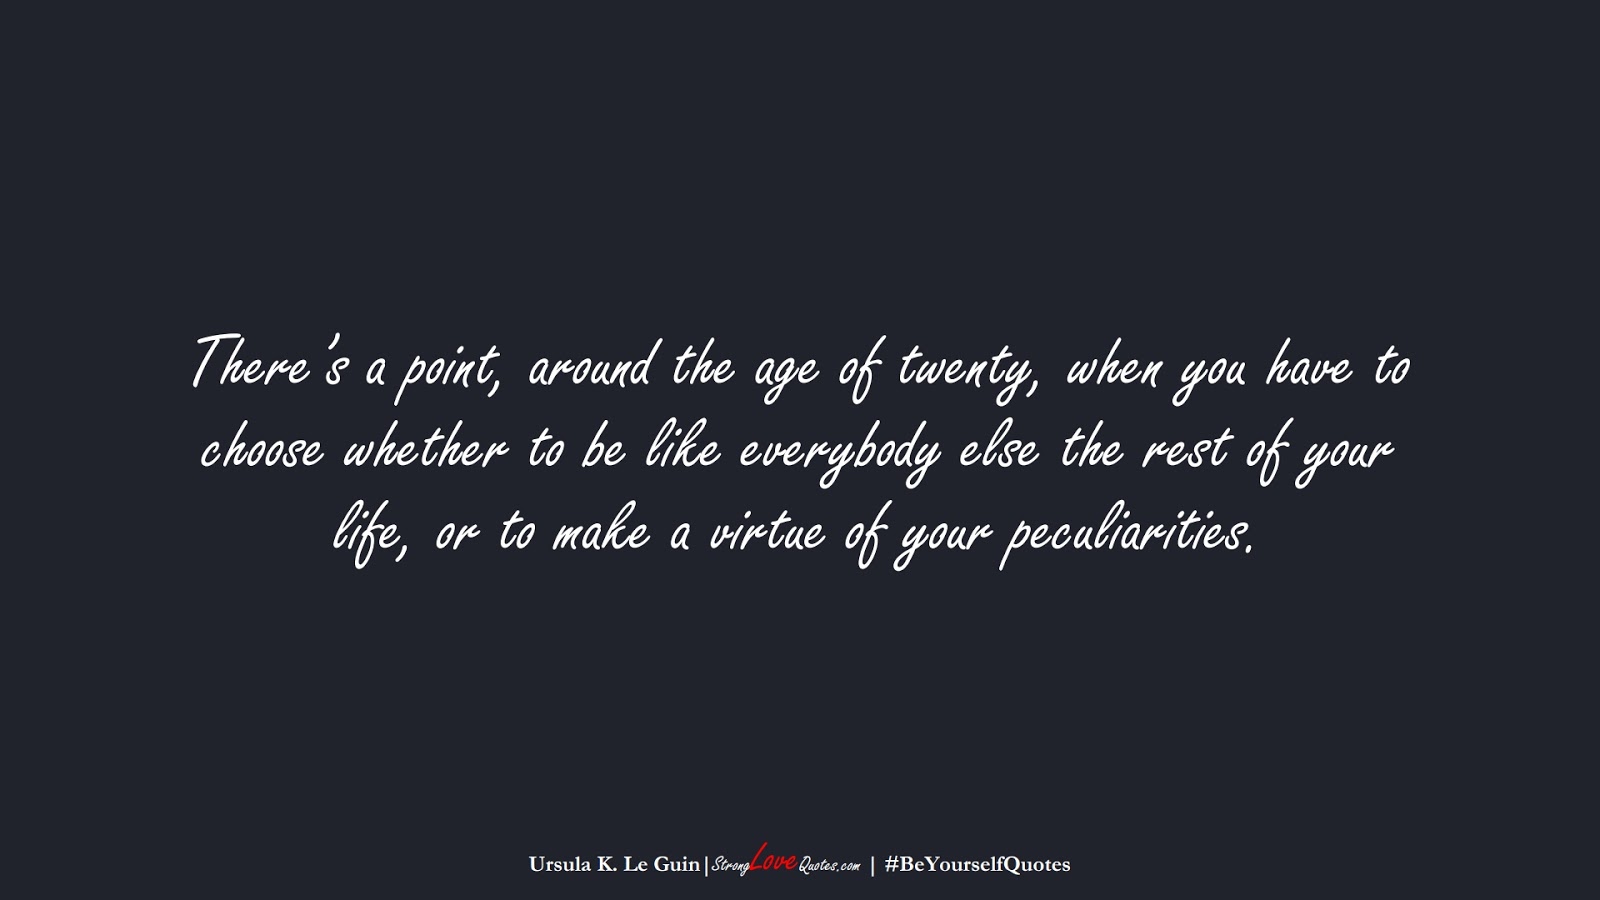 There’s a point, around the age of twenty, when you have to choose whether to be like everybody else the rest of your life, or to make a virtue of your peculiarities. (Ursula K. Le Guin);  #BeYourselfQuotes